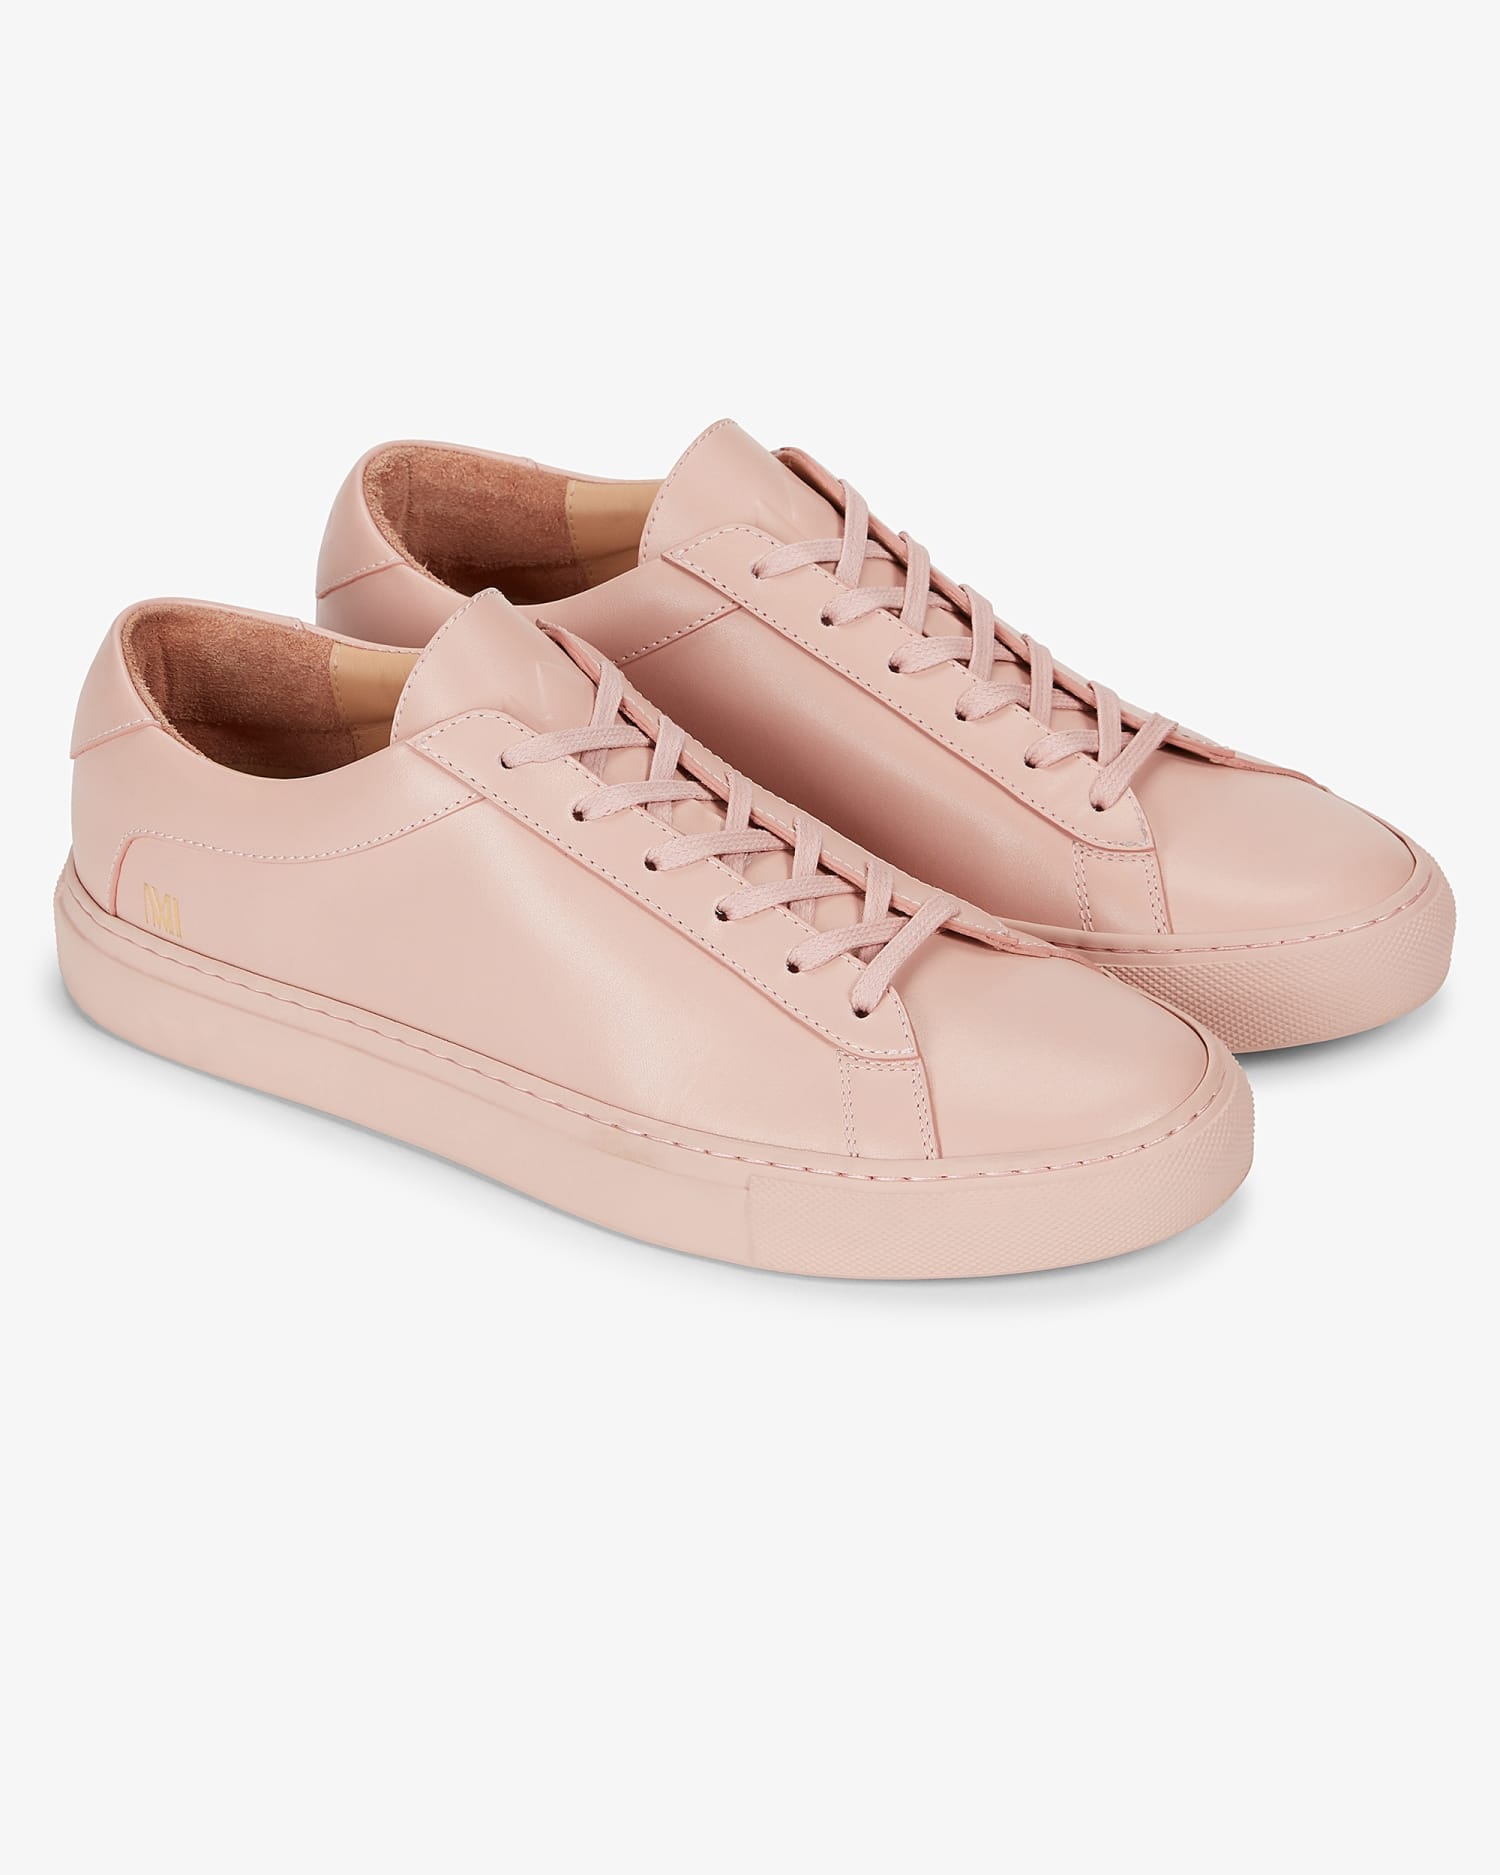 6 Sneakers To Wear With a Dress for a Classic Pairing | Well+Good